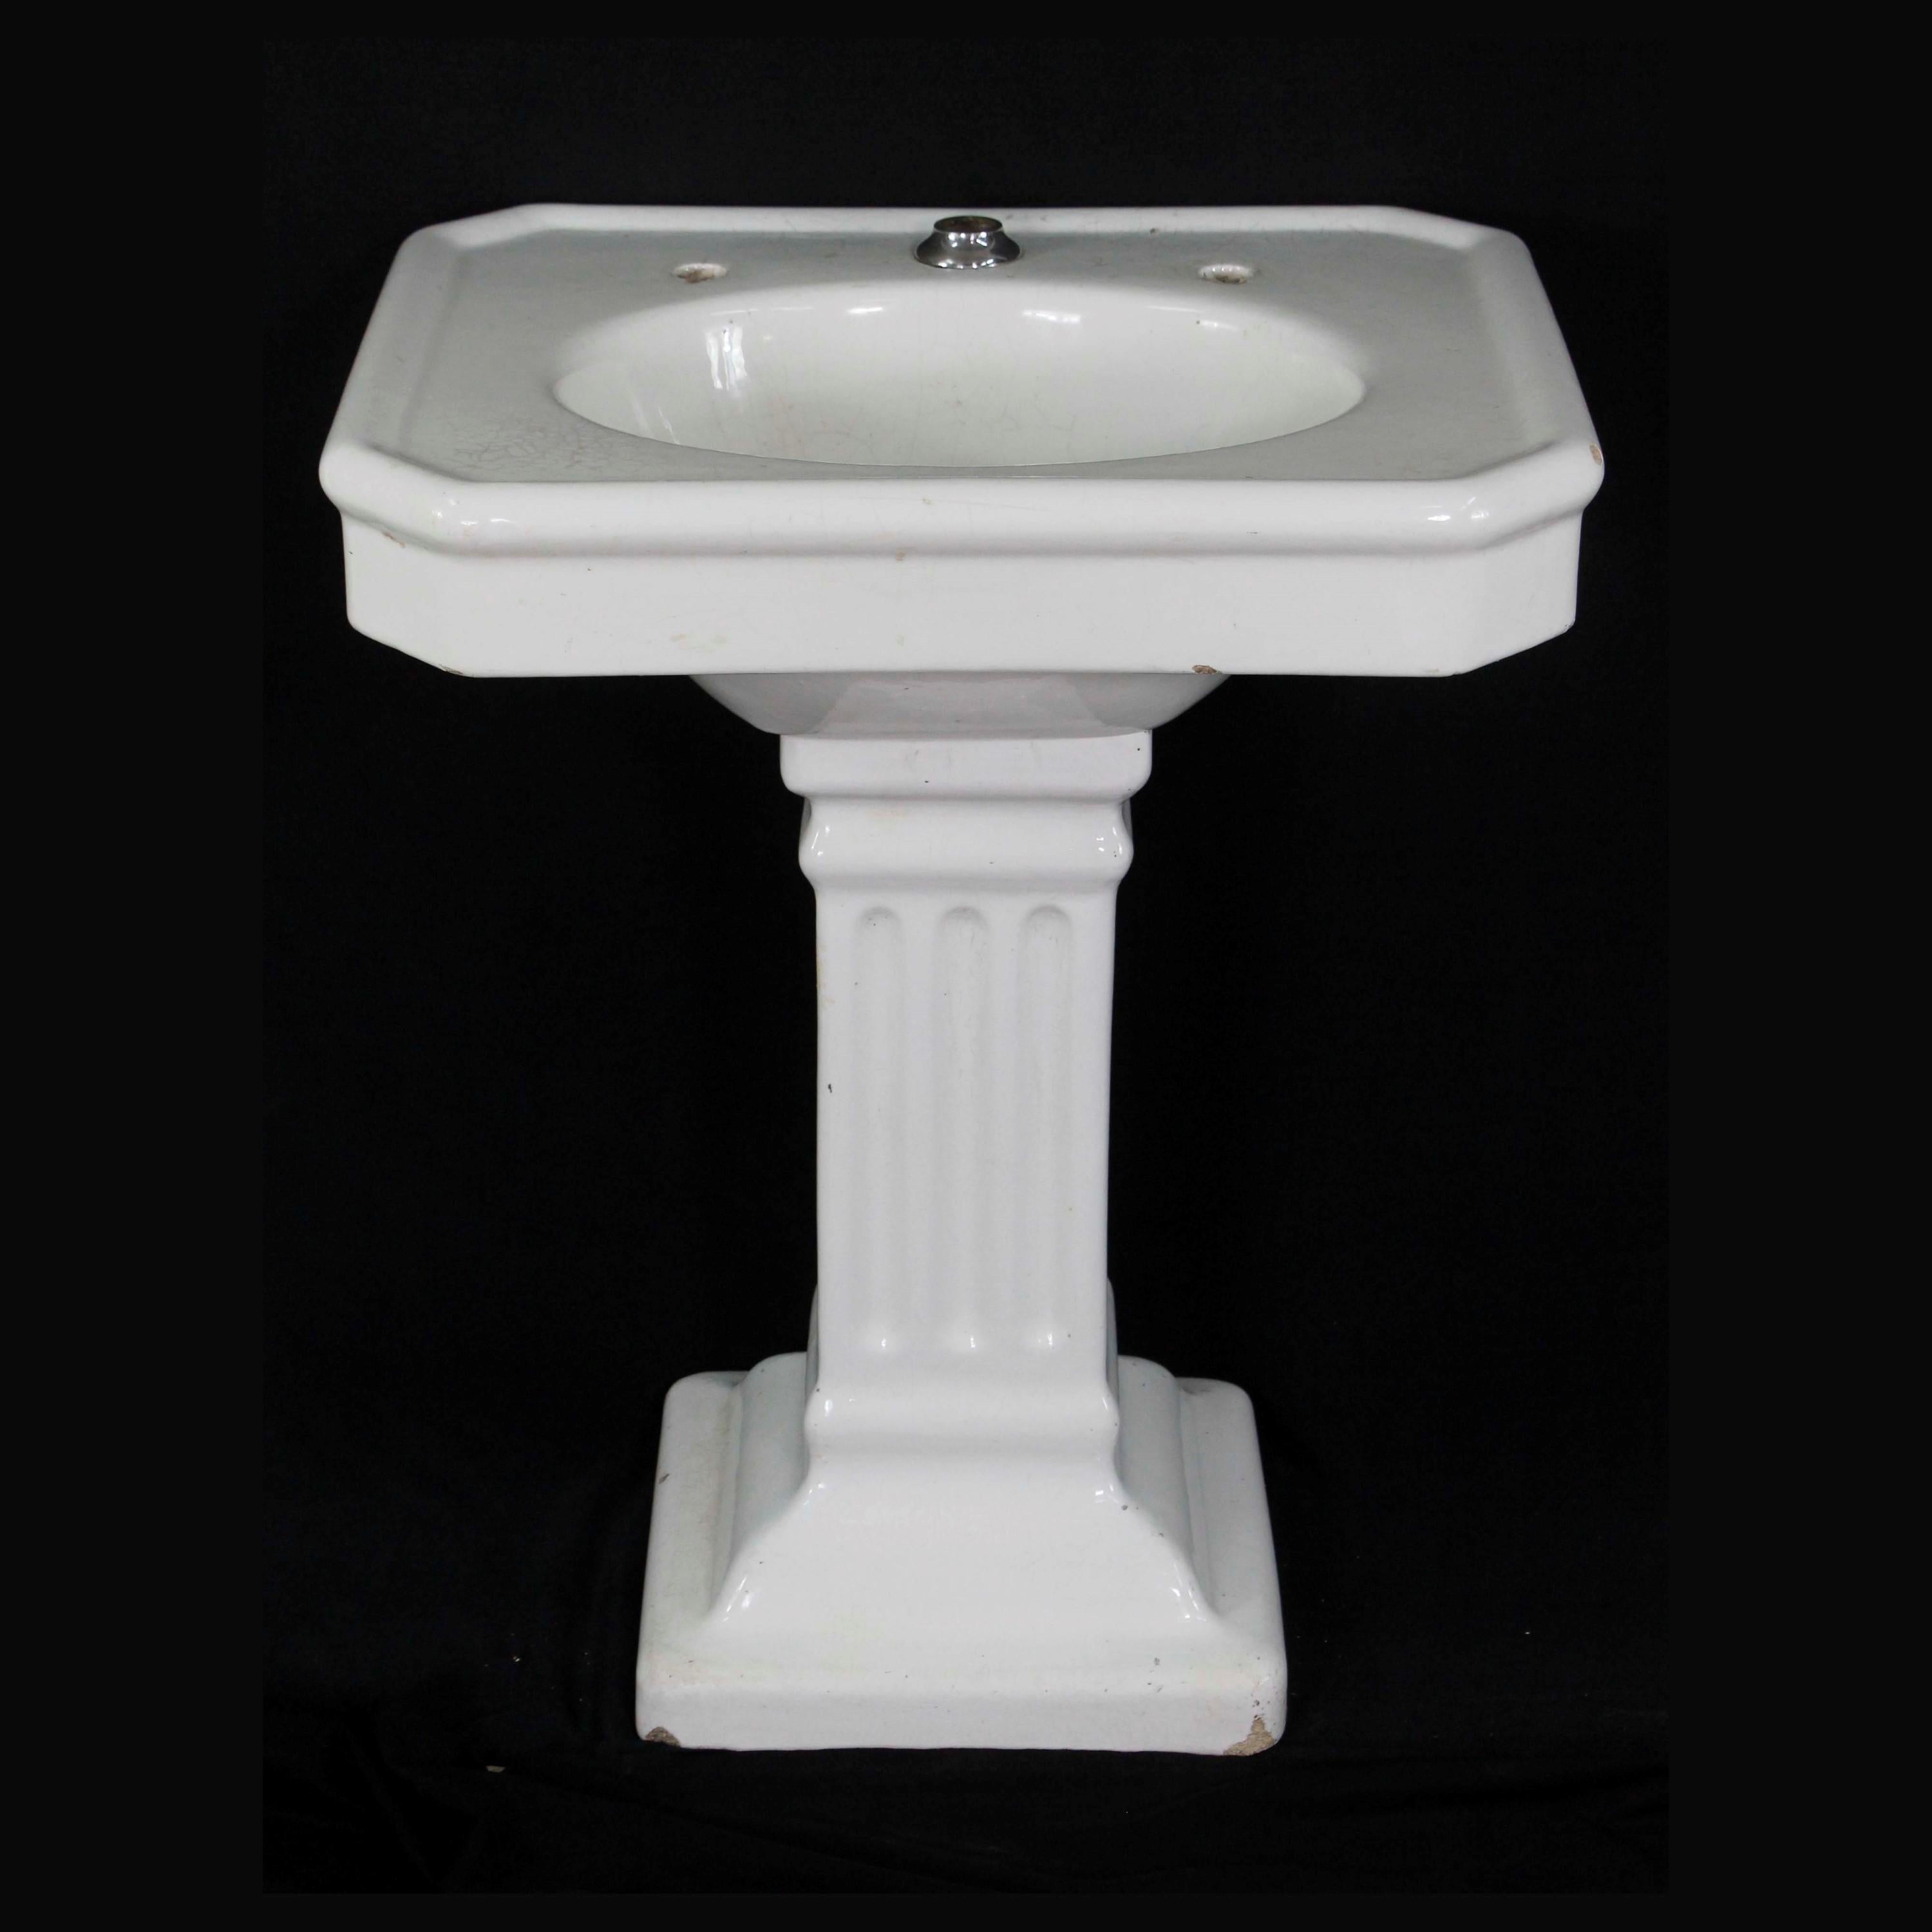 Antique cast earthenware pedestal sink with white porcelain glaze and fluted base. It has a crackled glaze which adds to its beauty. There are some chips along the top and the base. Please see the photos. No hardware is included. 

